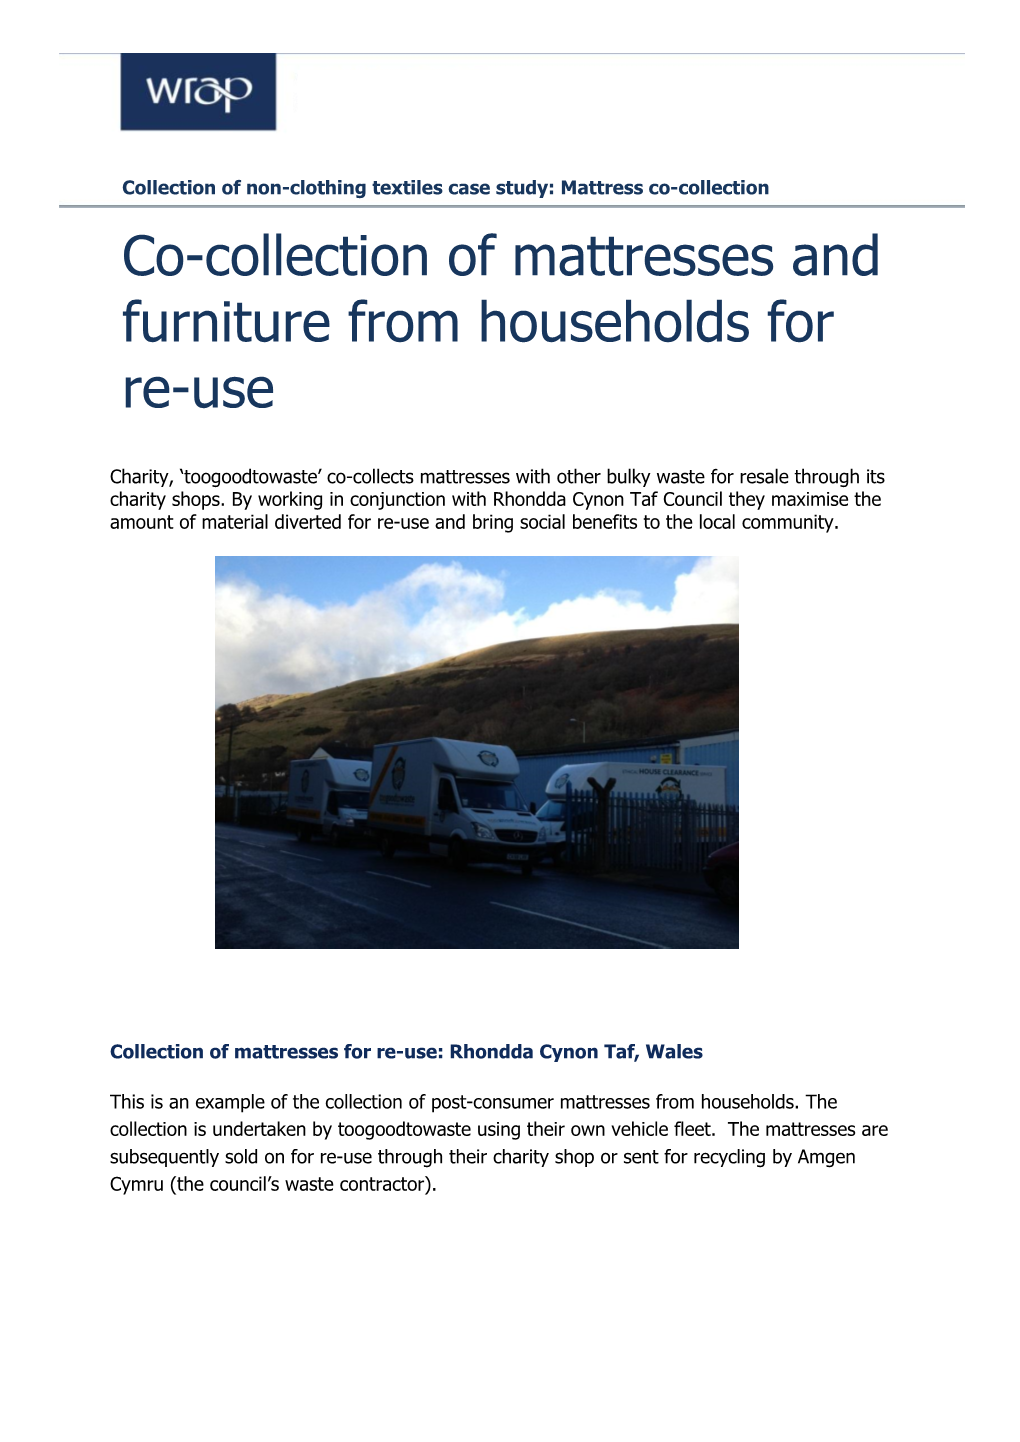 Collection of Mattresses and Furniture from Households for Re-Use